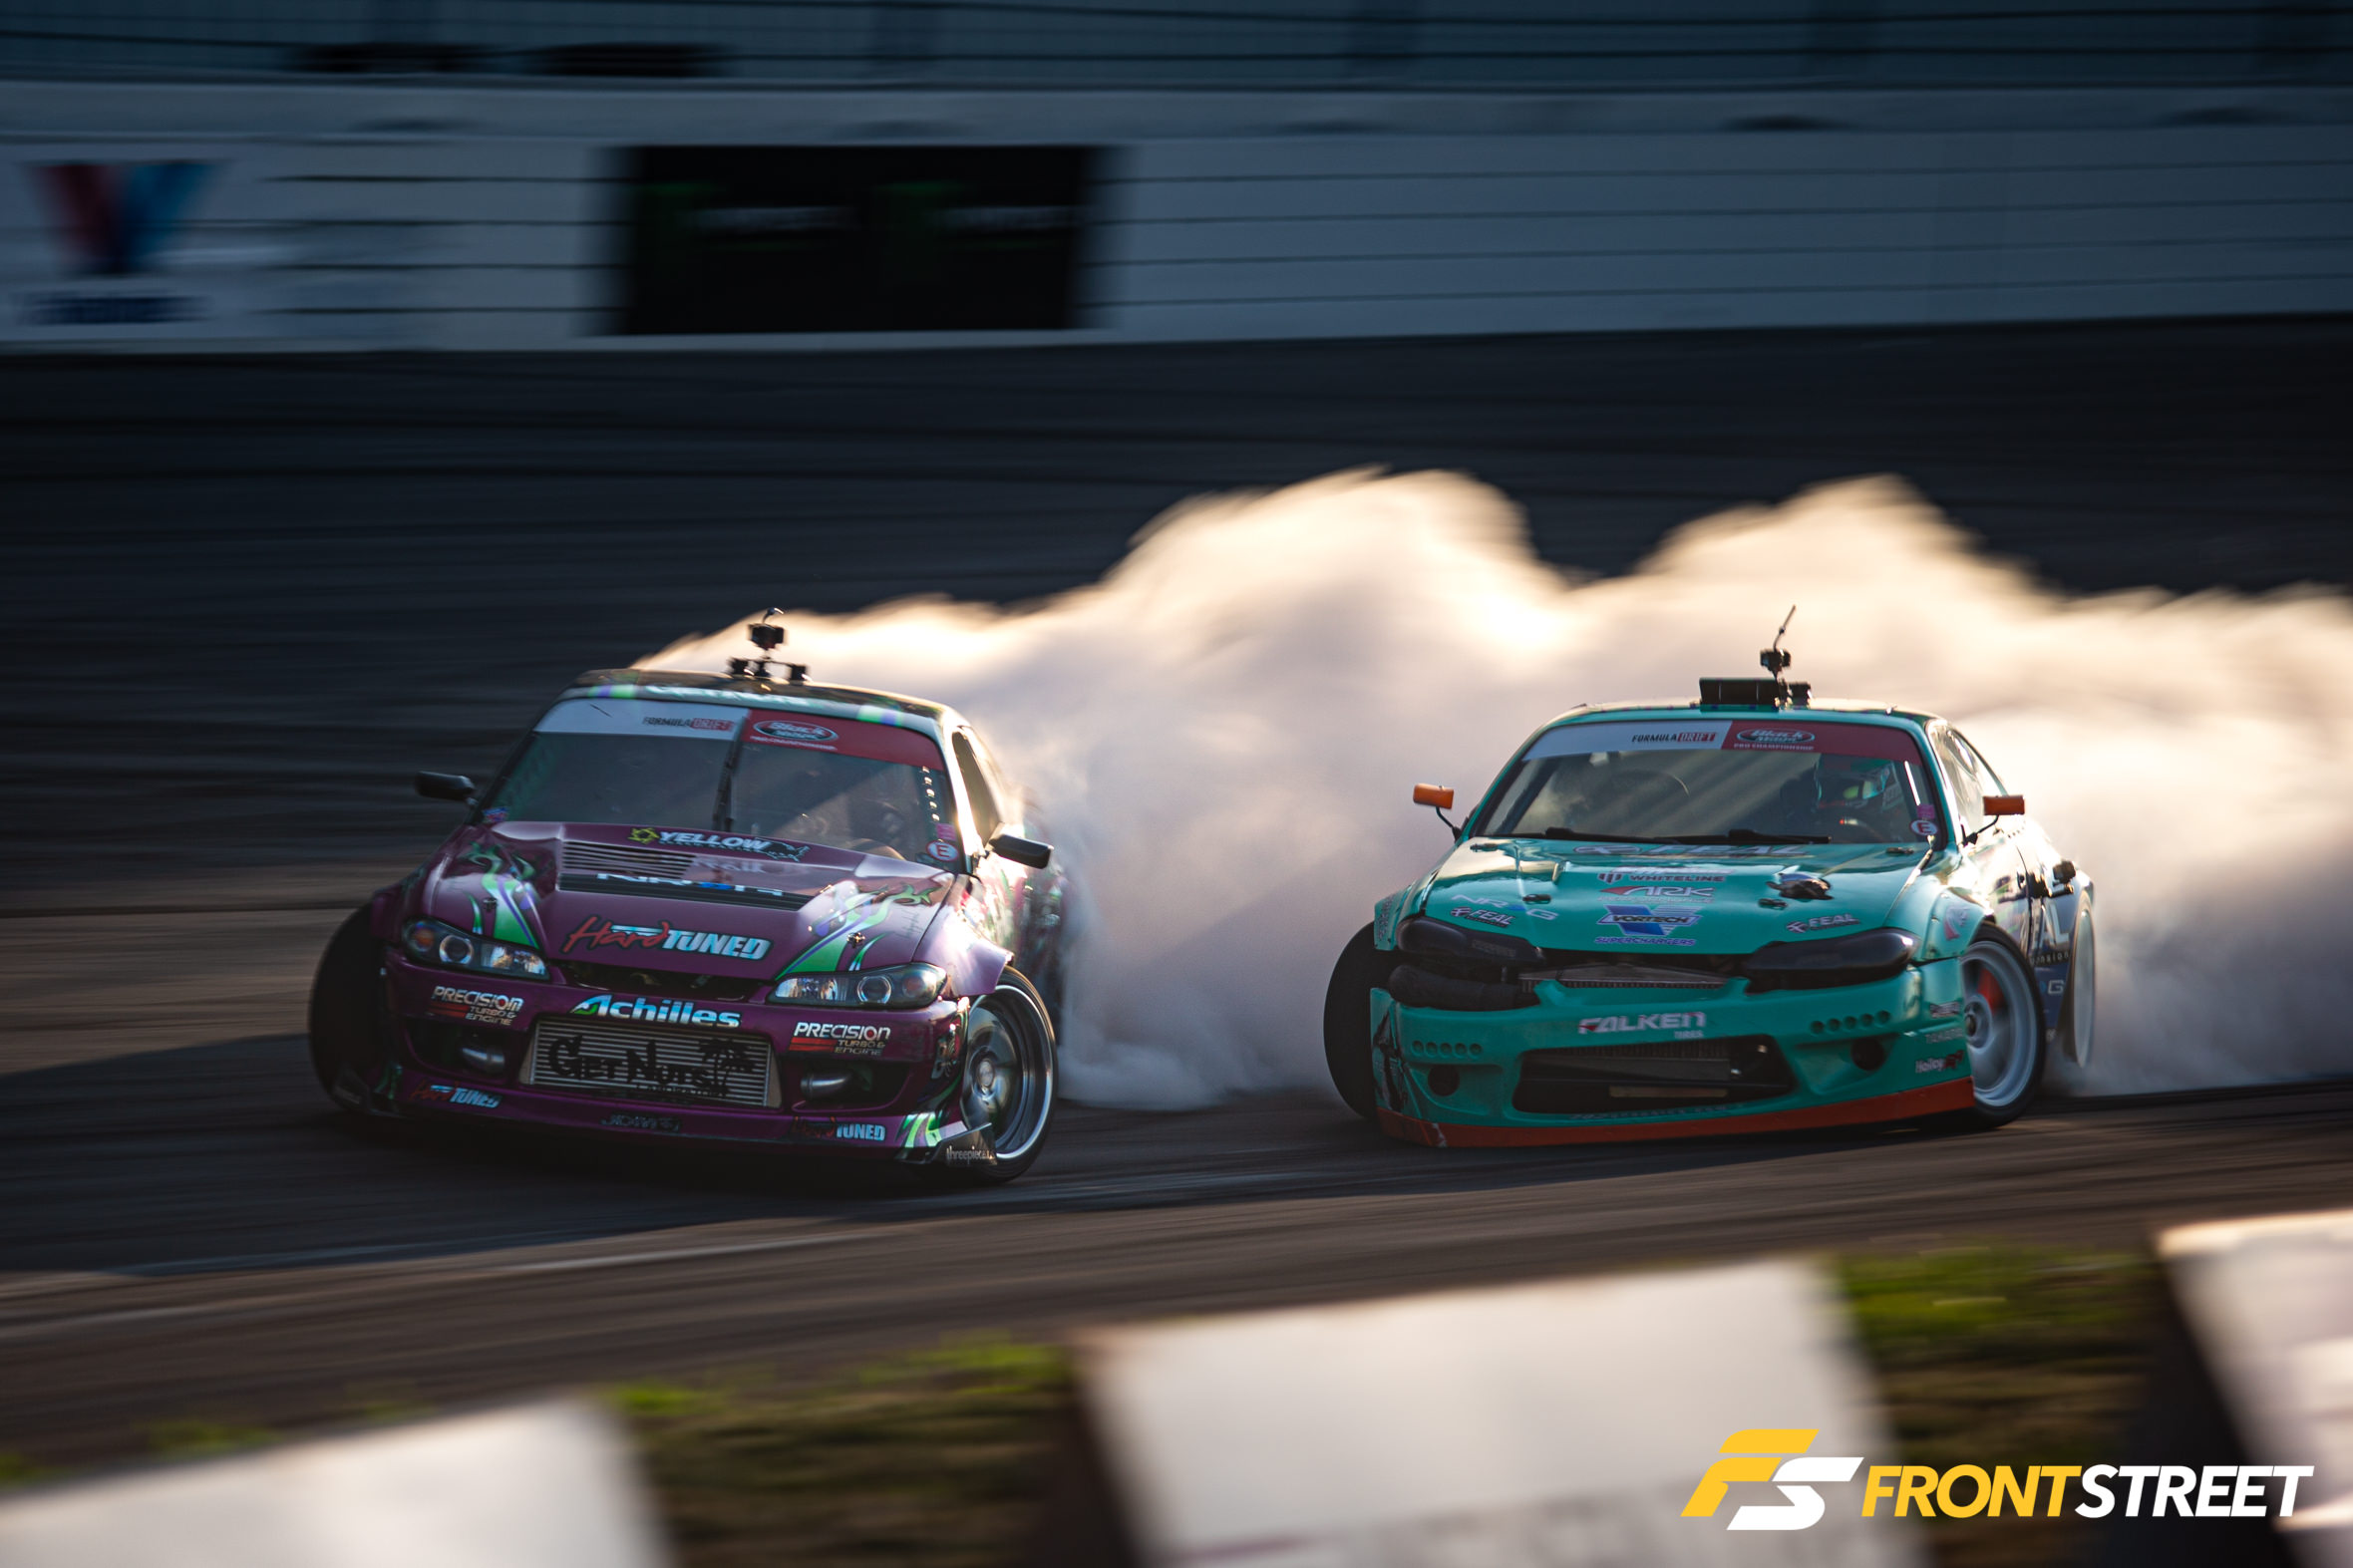 Why Formula Drift St. Louis In 2019 Was So Pivotal For The Season